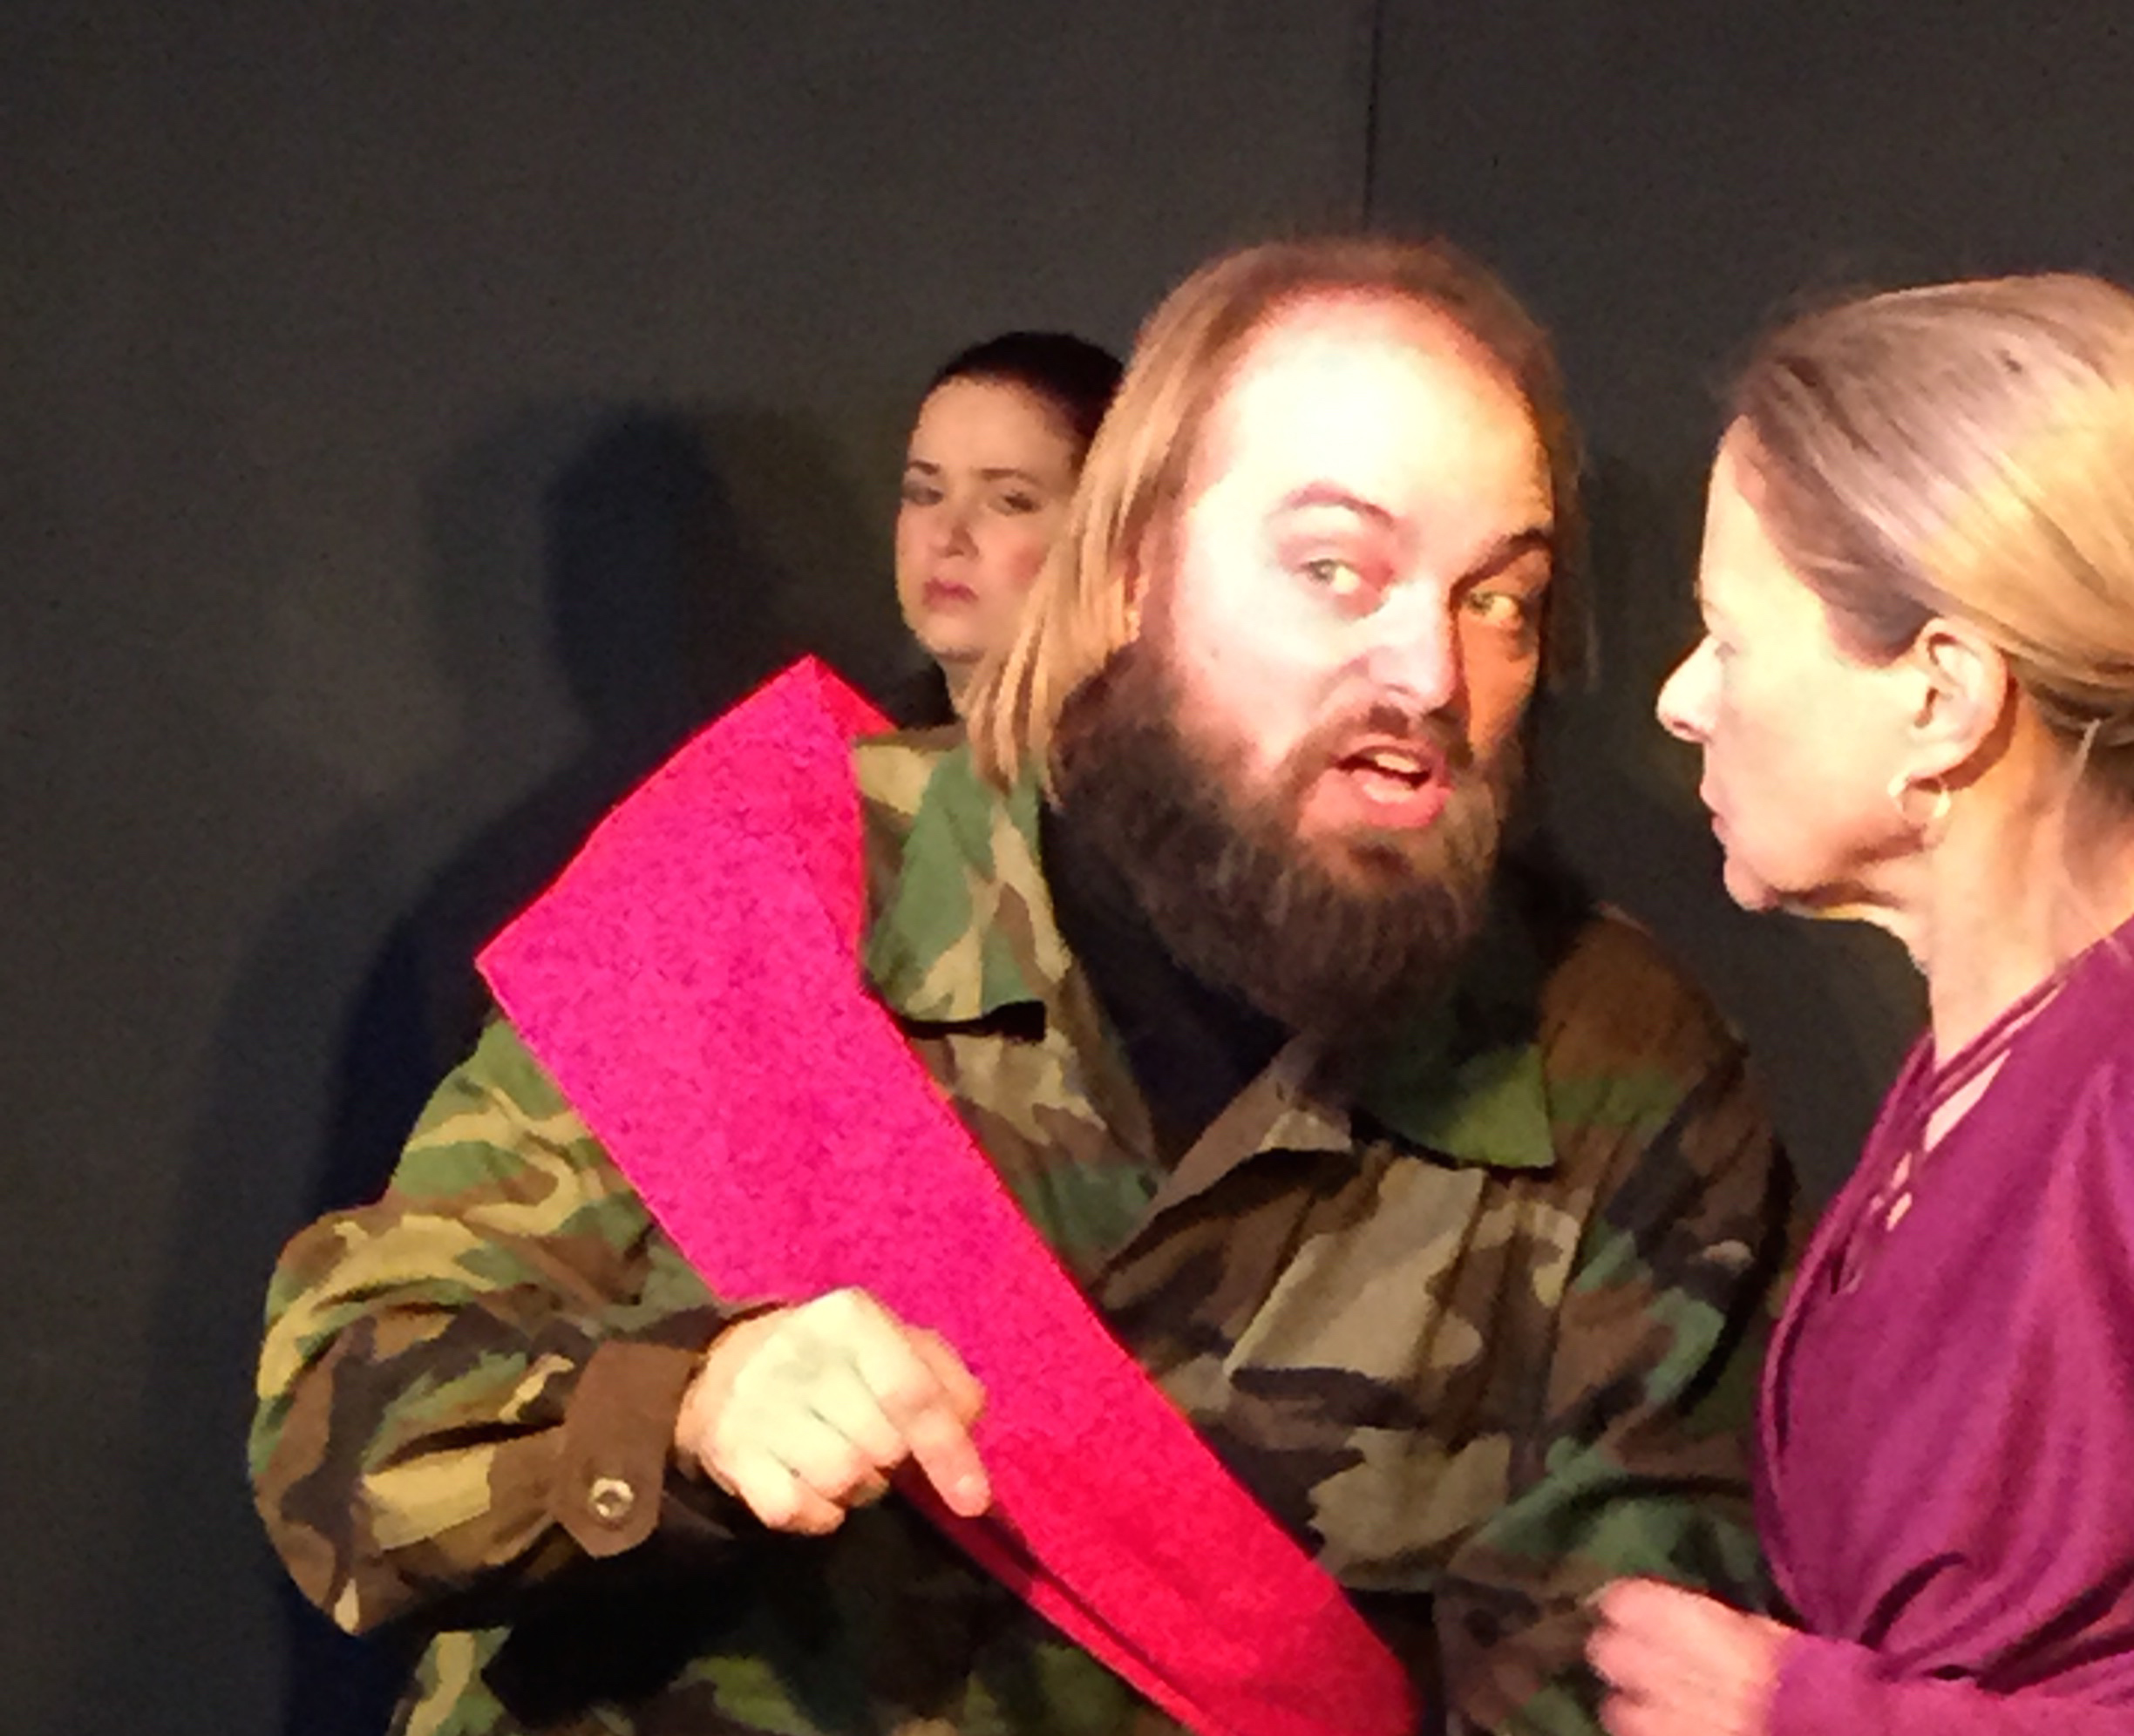 John Mortell plays Macbeth, while Indianapolis native Sally Carter plays her role of Lady Macbeth. (Submitted photo)